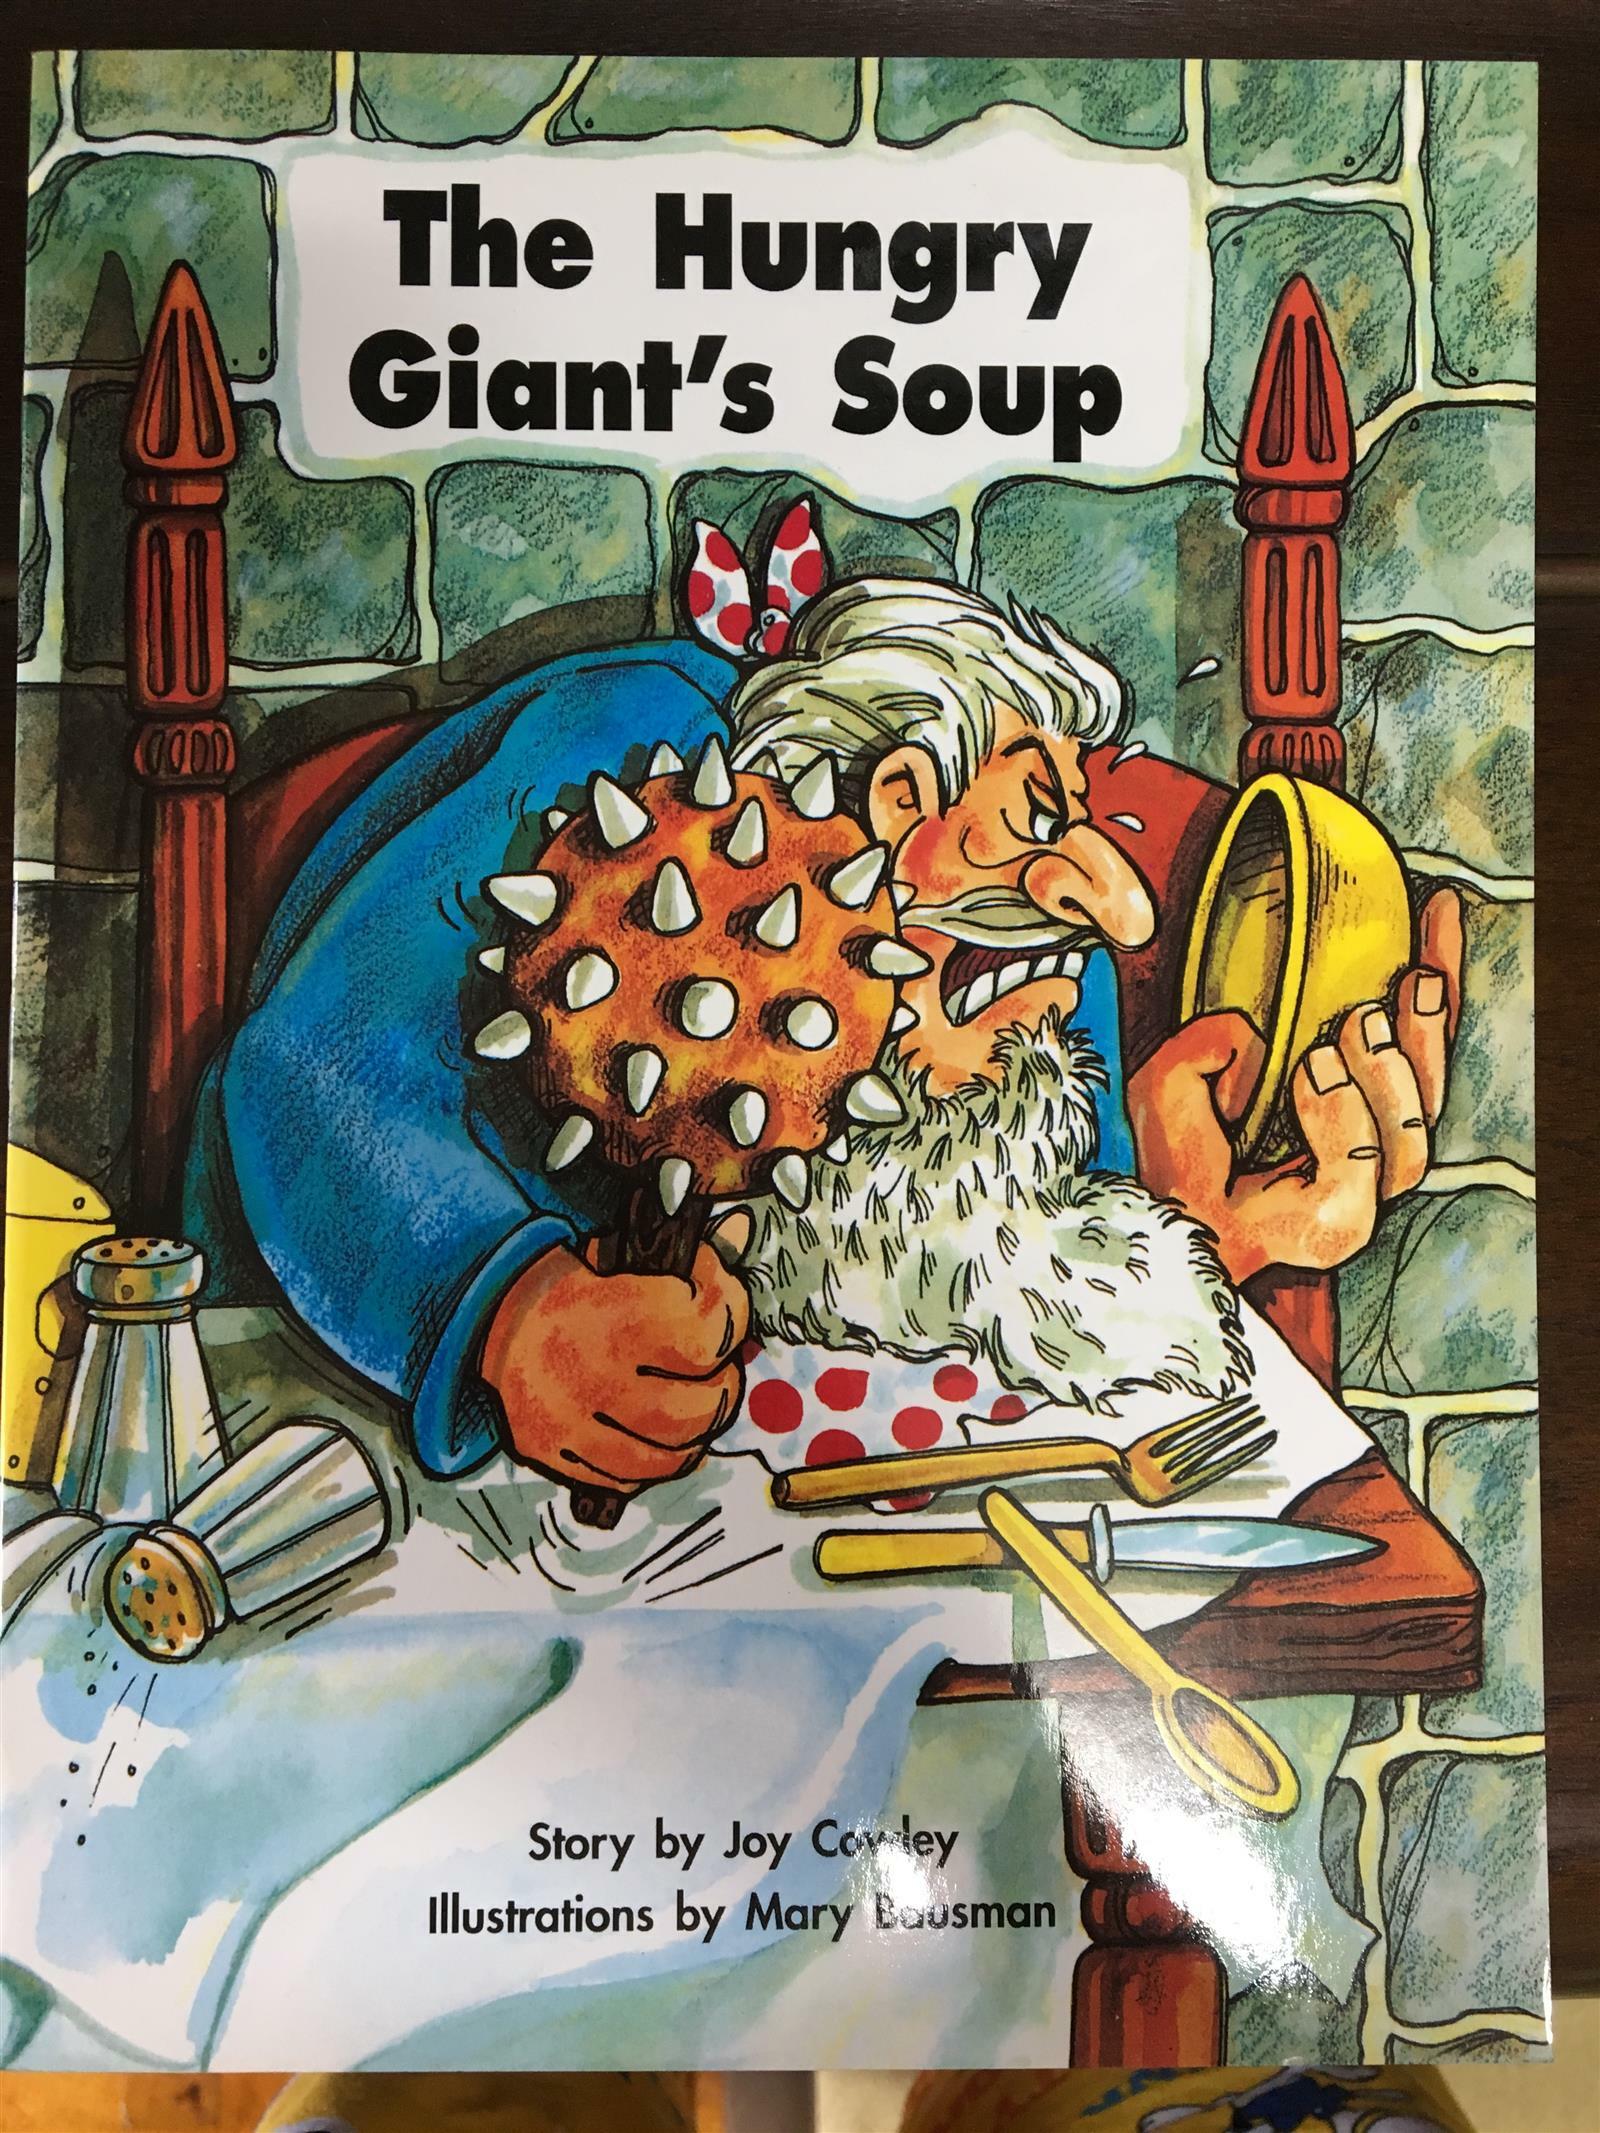 (The)hungry giant's soup